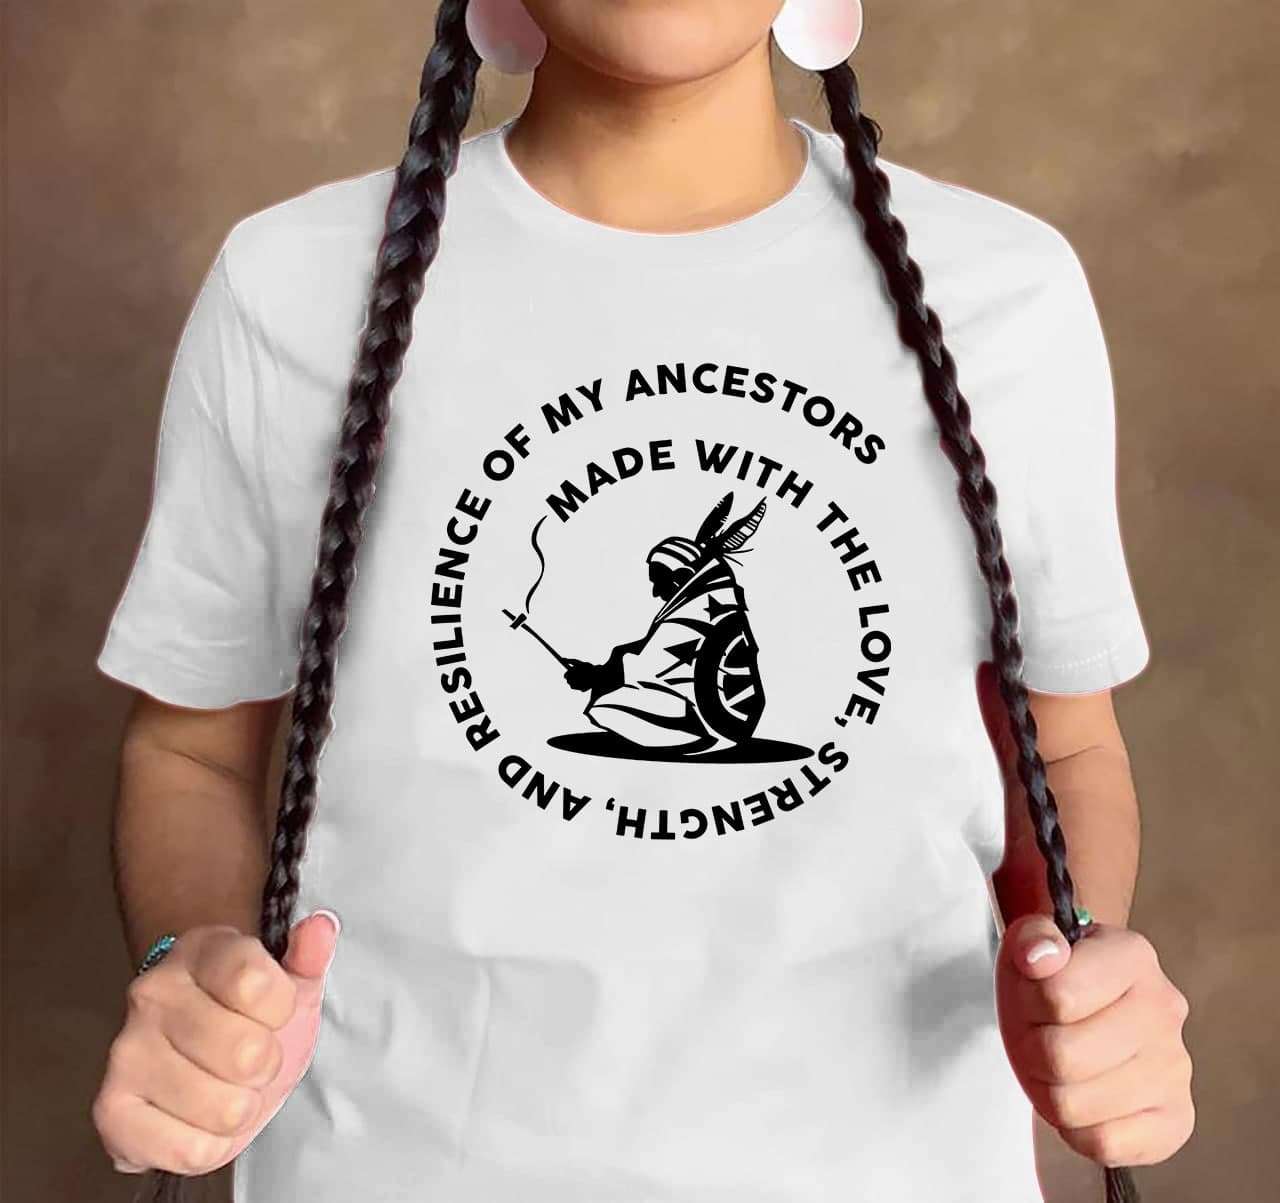 Made with the love, strength, and resilience of my ancestors - Native American